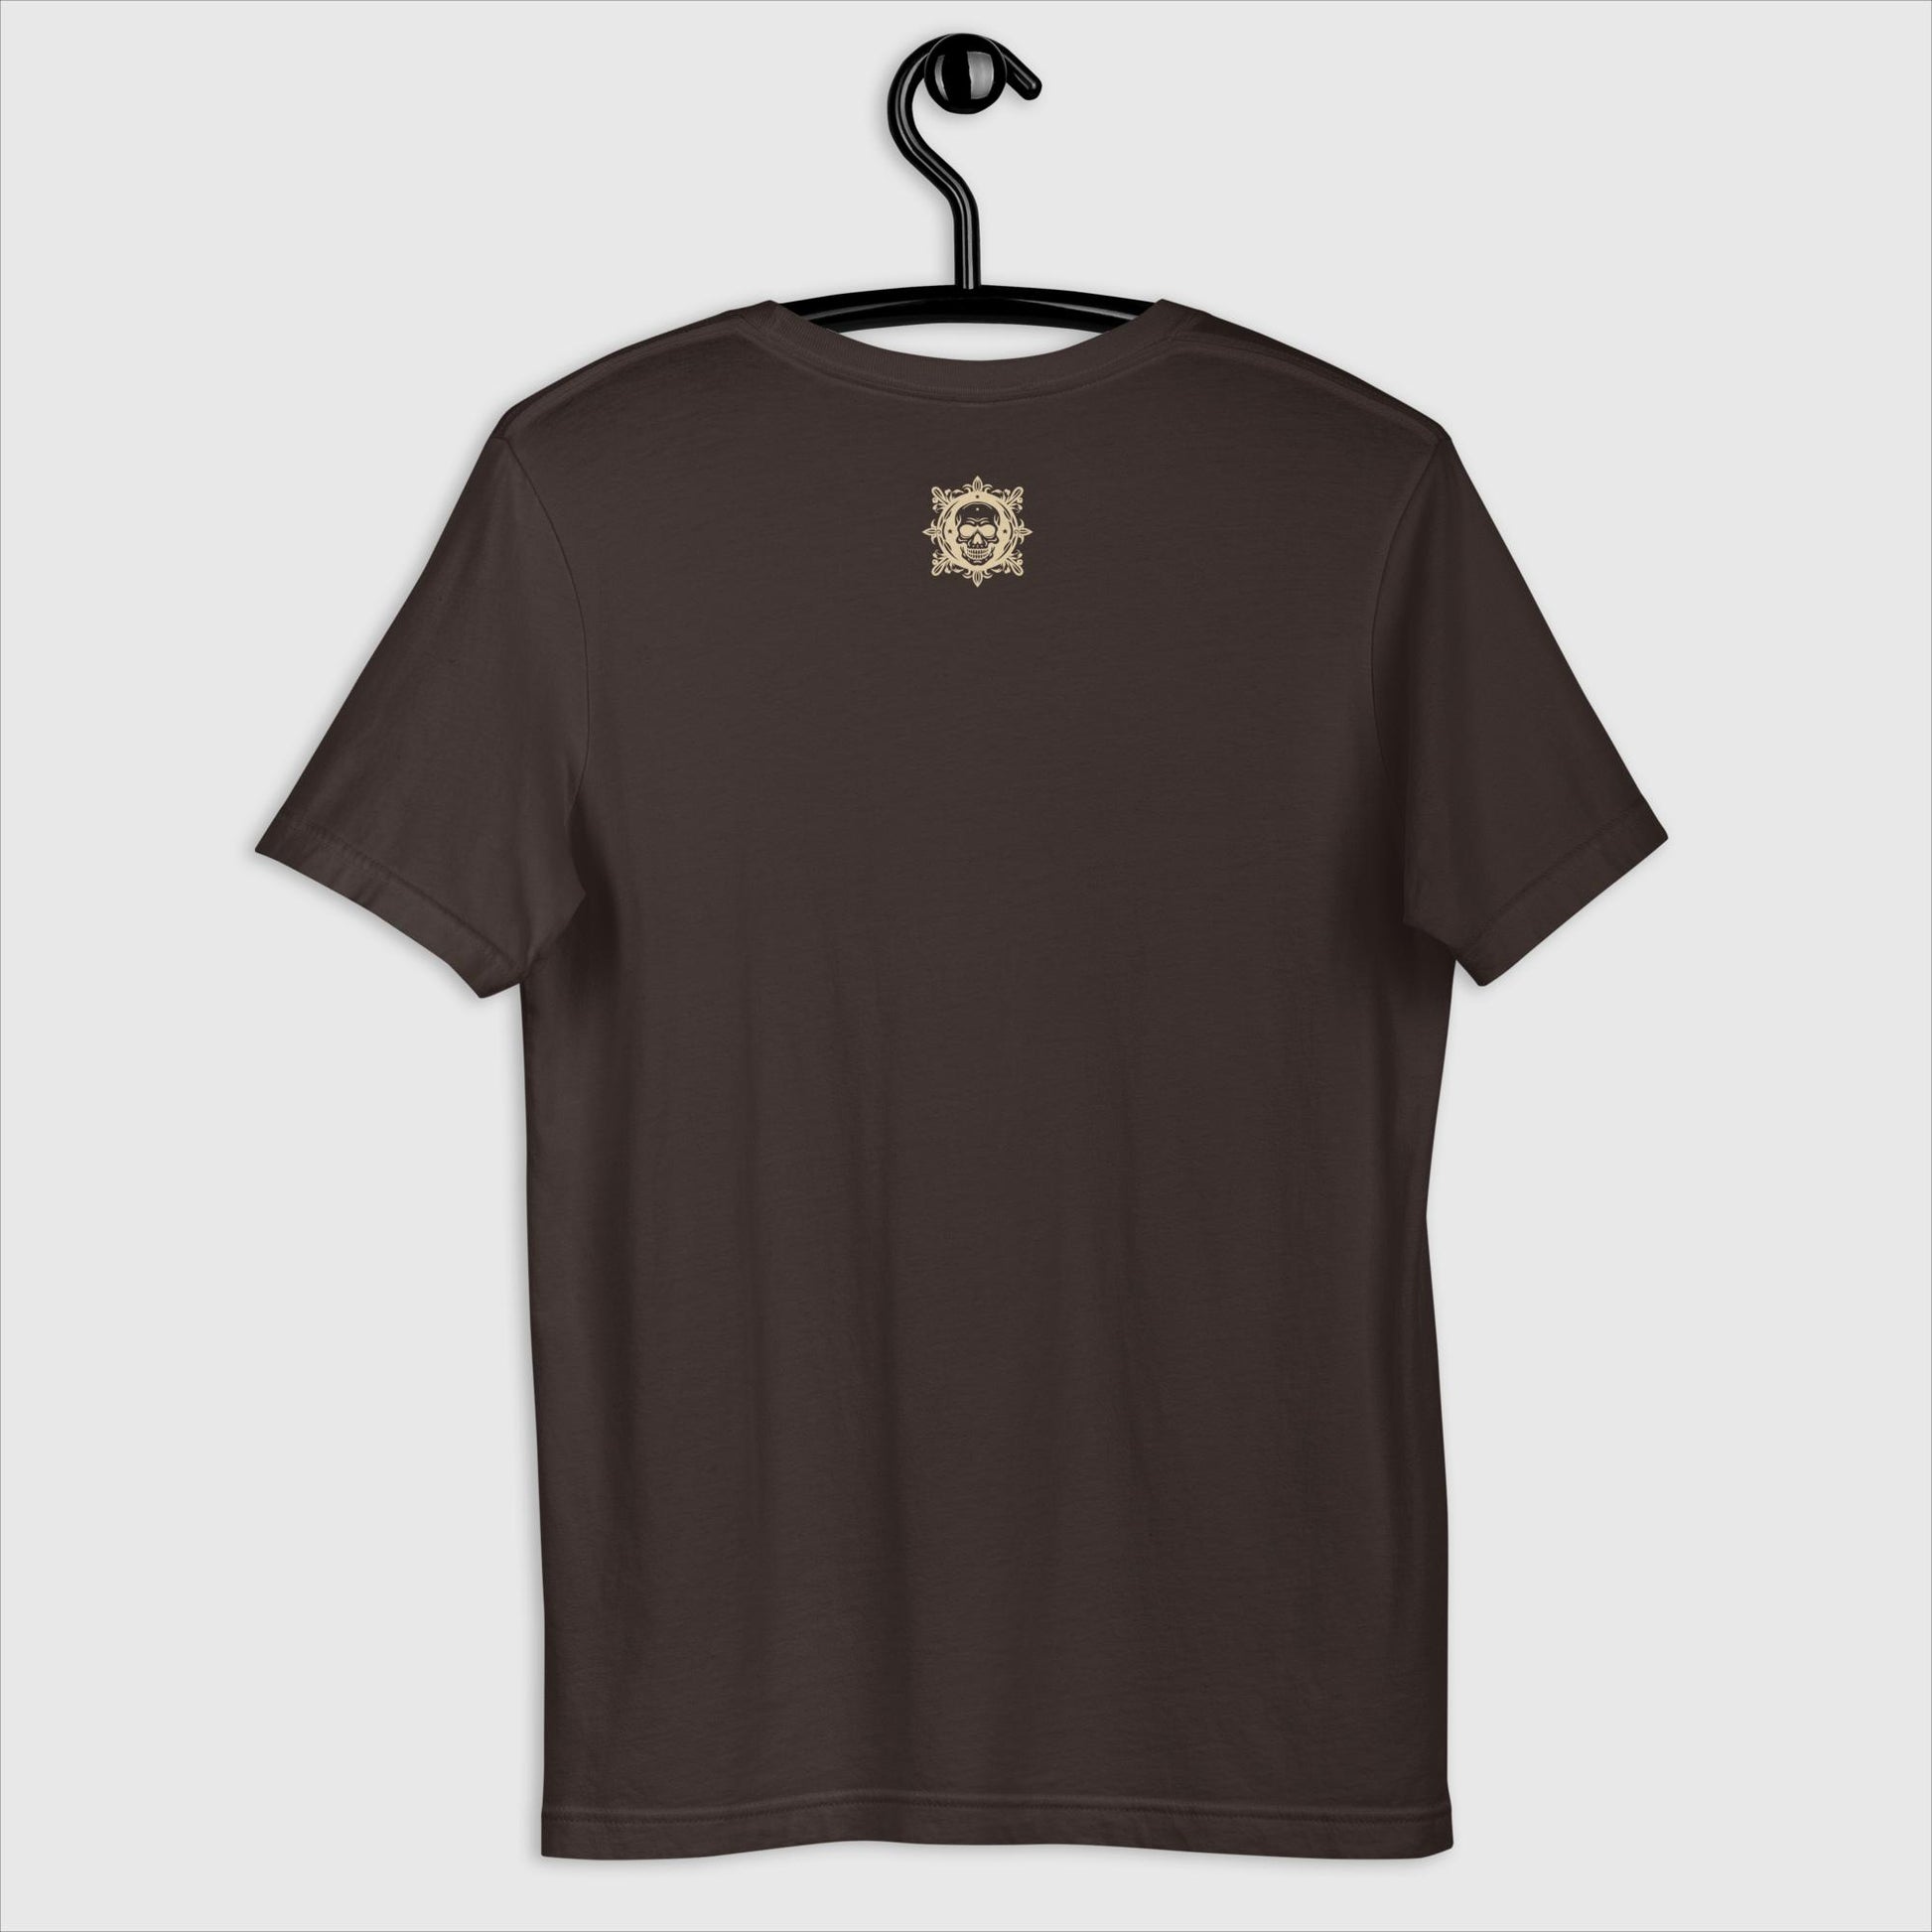     back view of brown Dairy Doll Unisex t-shirt